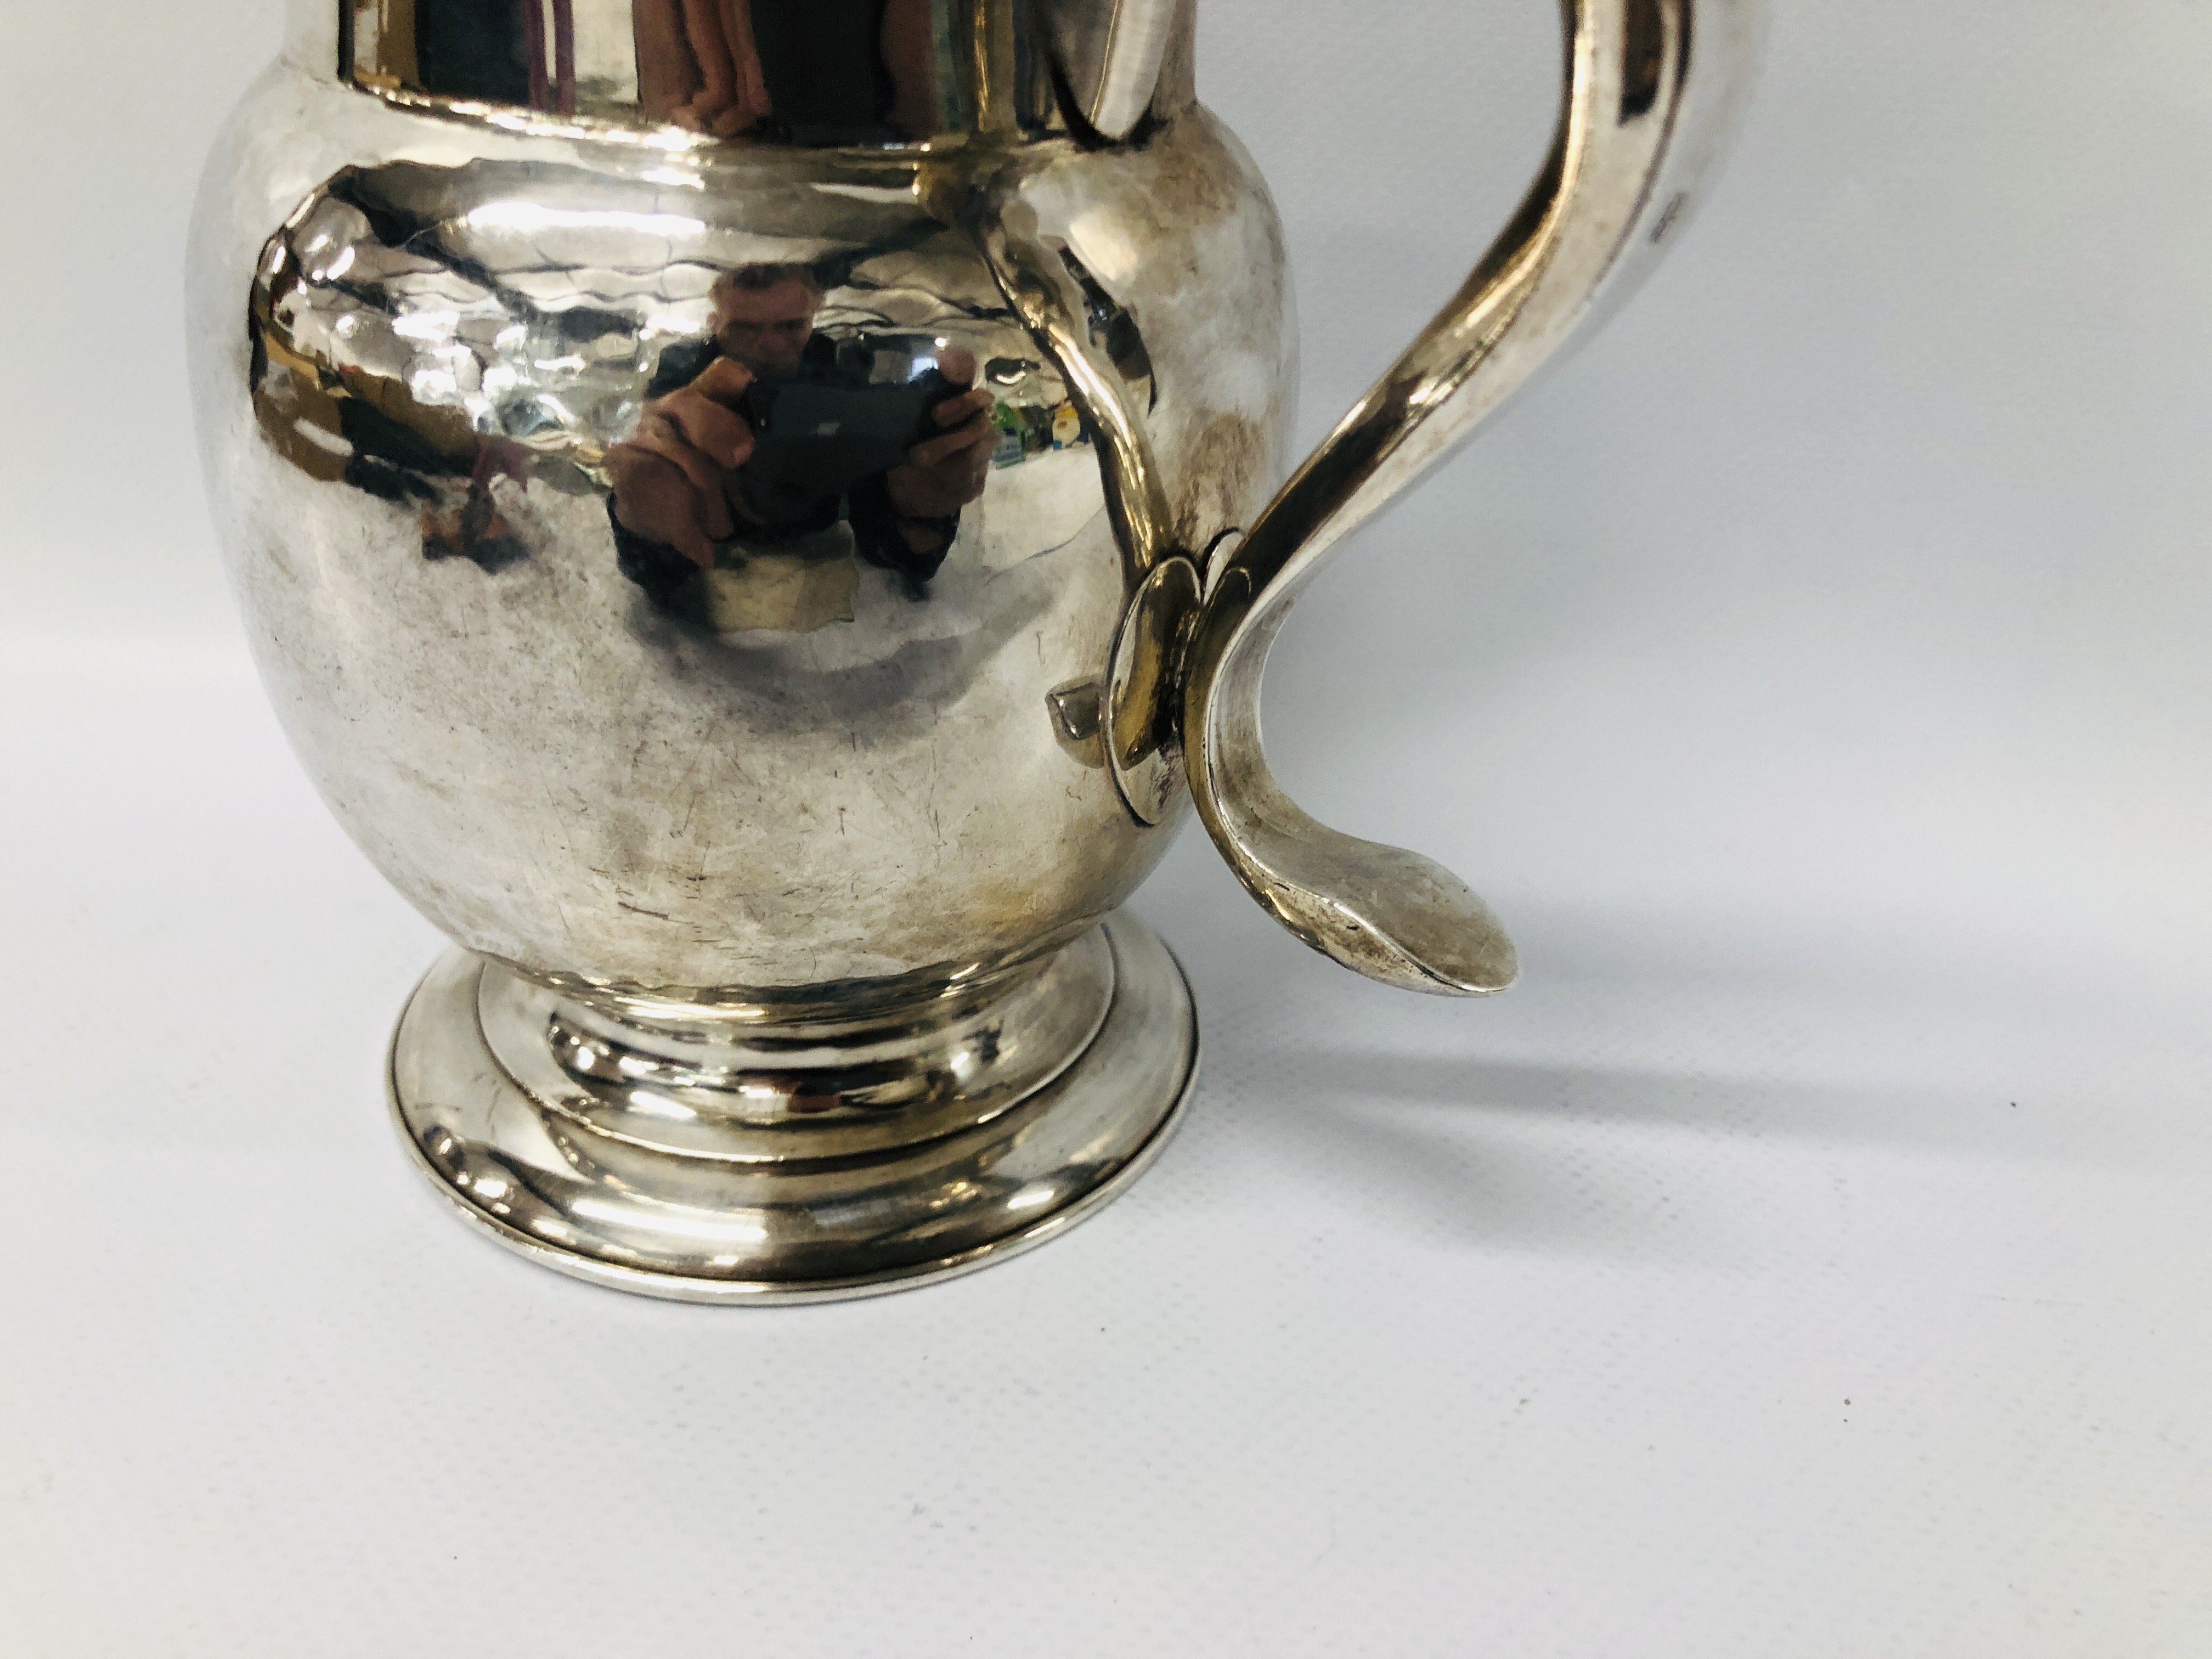 A GEORGE III SILVER JUG, THE 'S' SHAPED HANDLE ON A PLAIN BULBOUS BODY, NEWCASTLE 1790, J. - Image 6 of 21